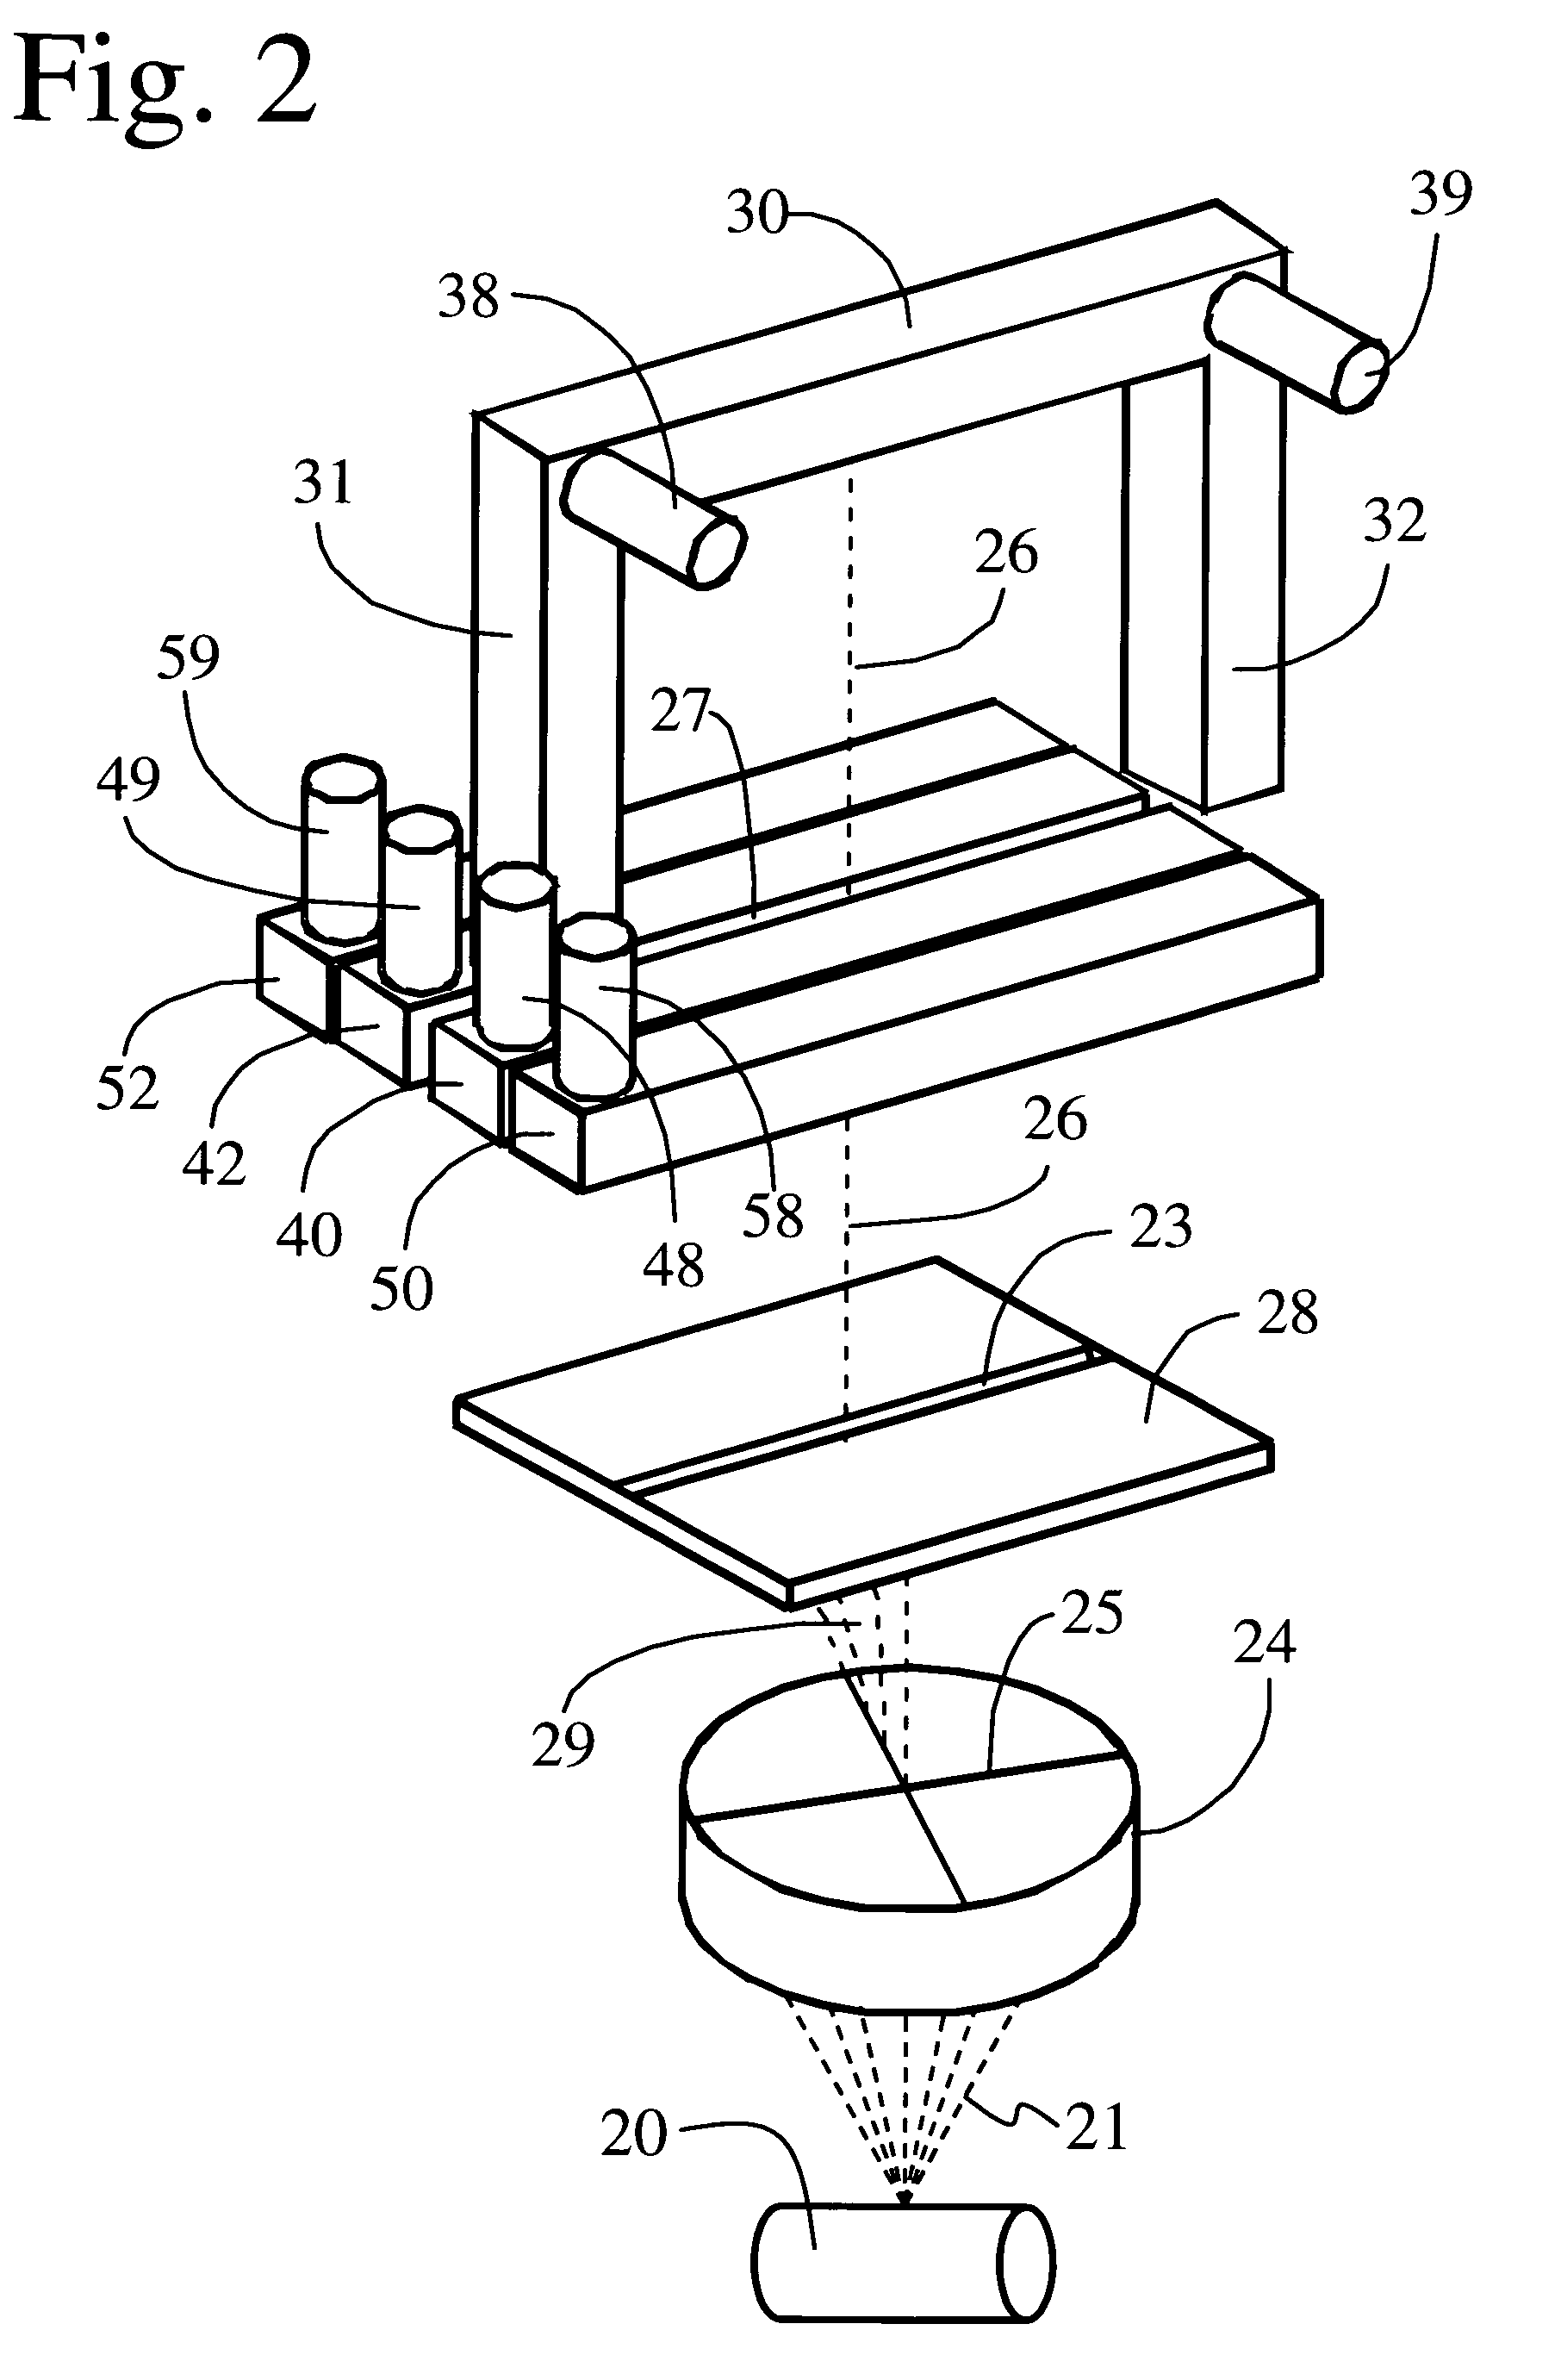 Scanning X-ray inspection system using scintillation detection with simultaneous counting and integrating modes